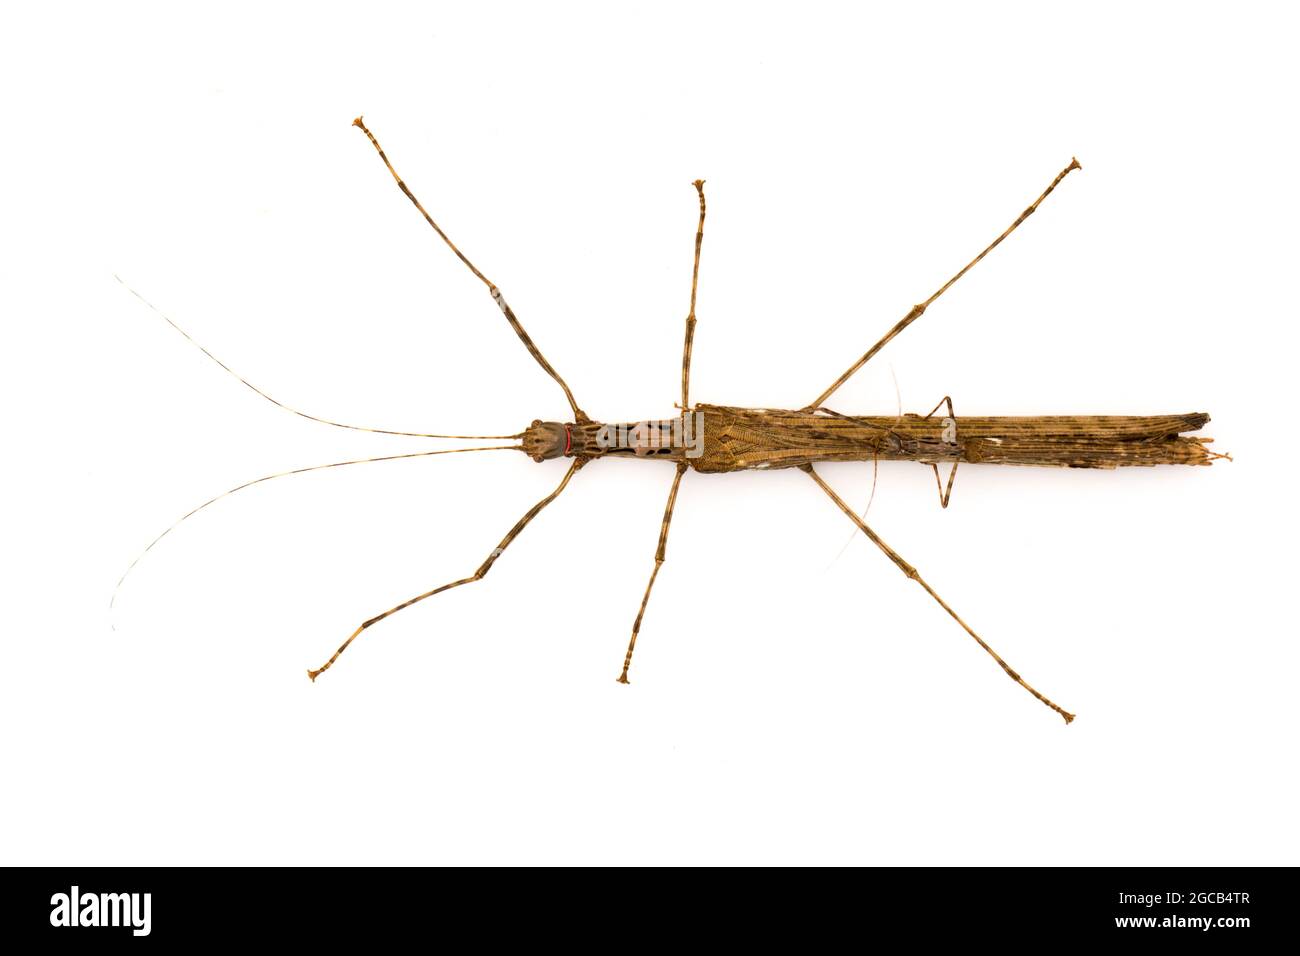 Image of a siam giant stick insect and stick insect baby on white background. Insect Animal. Stock Photo